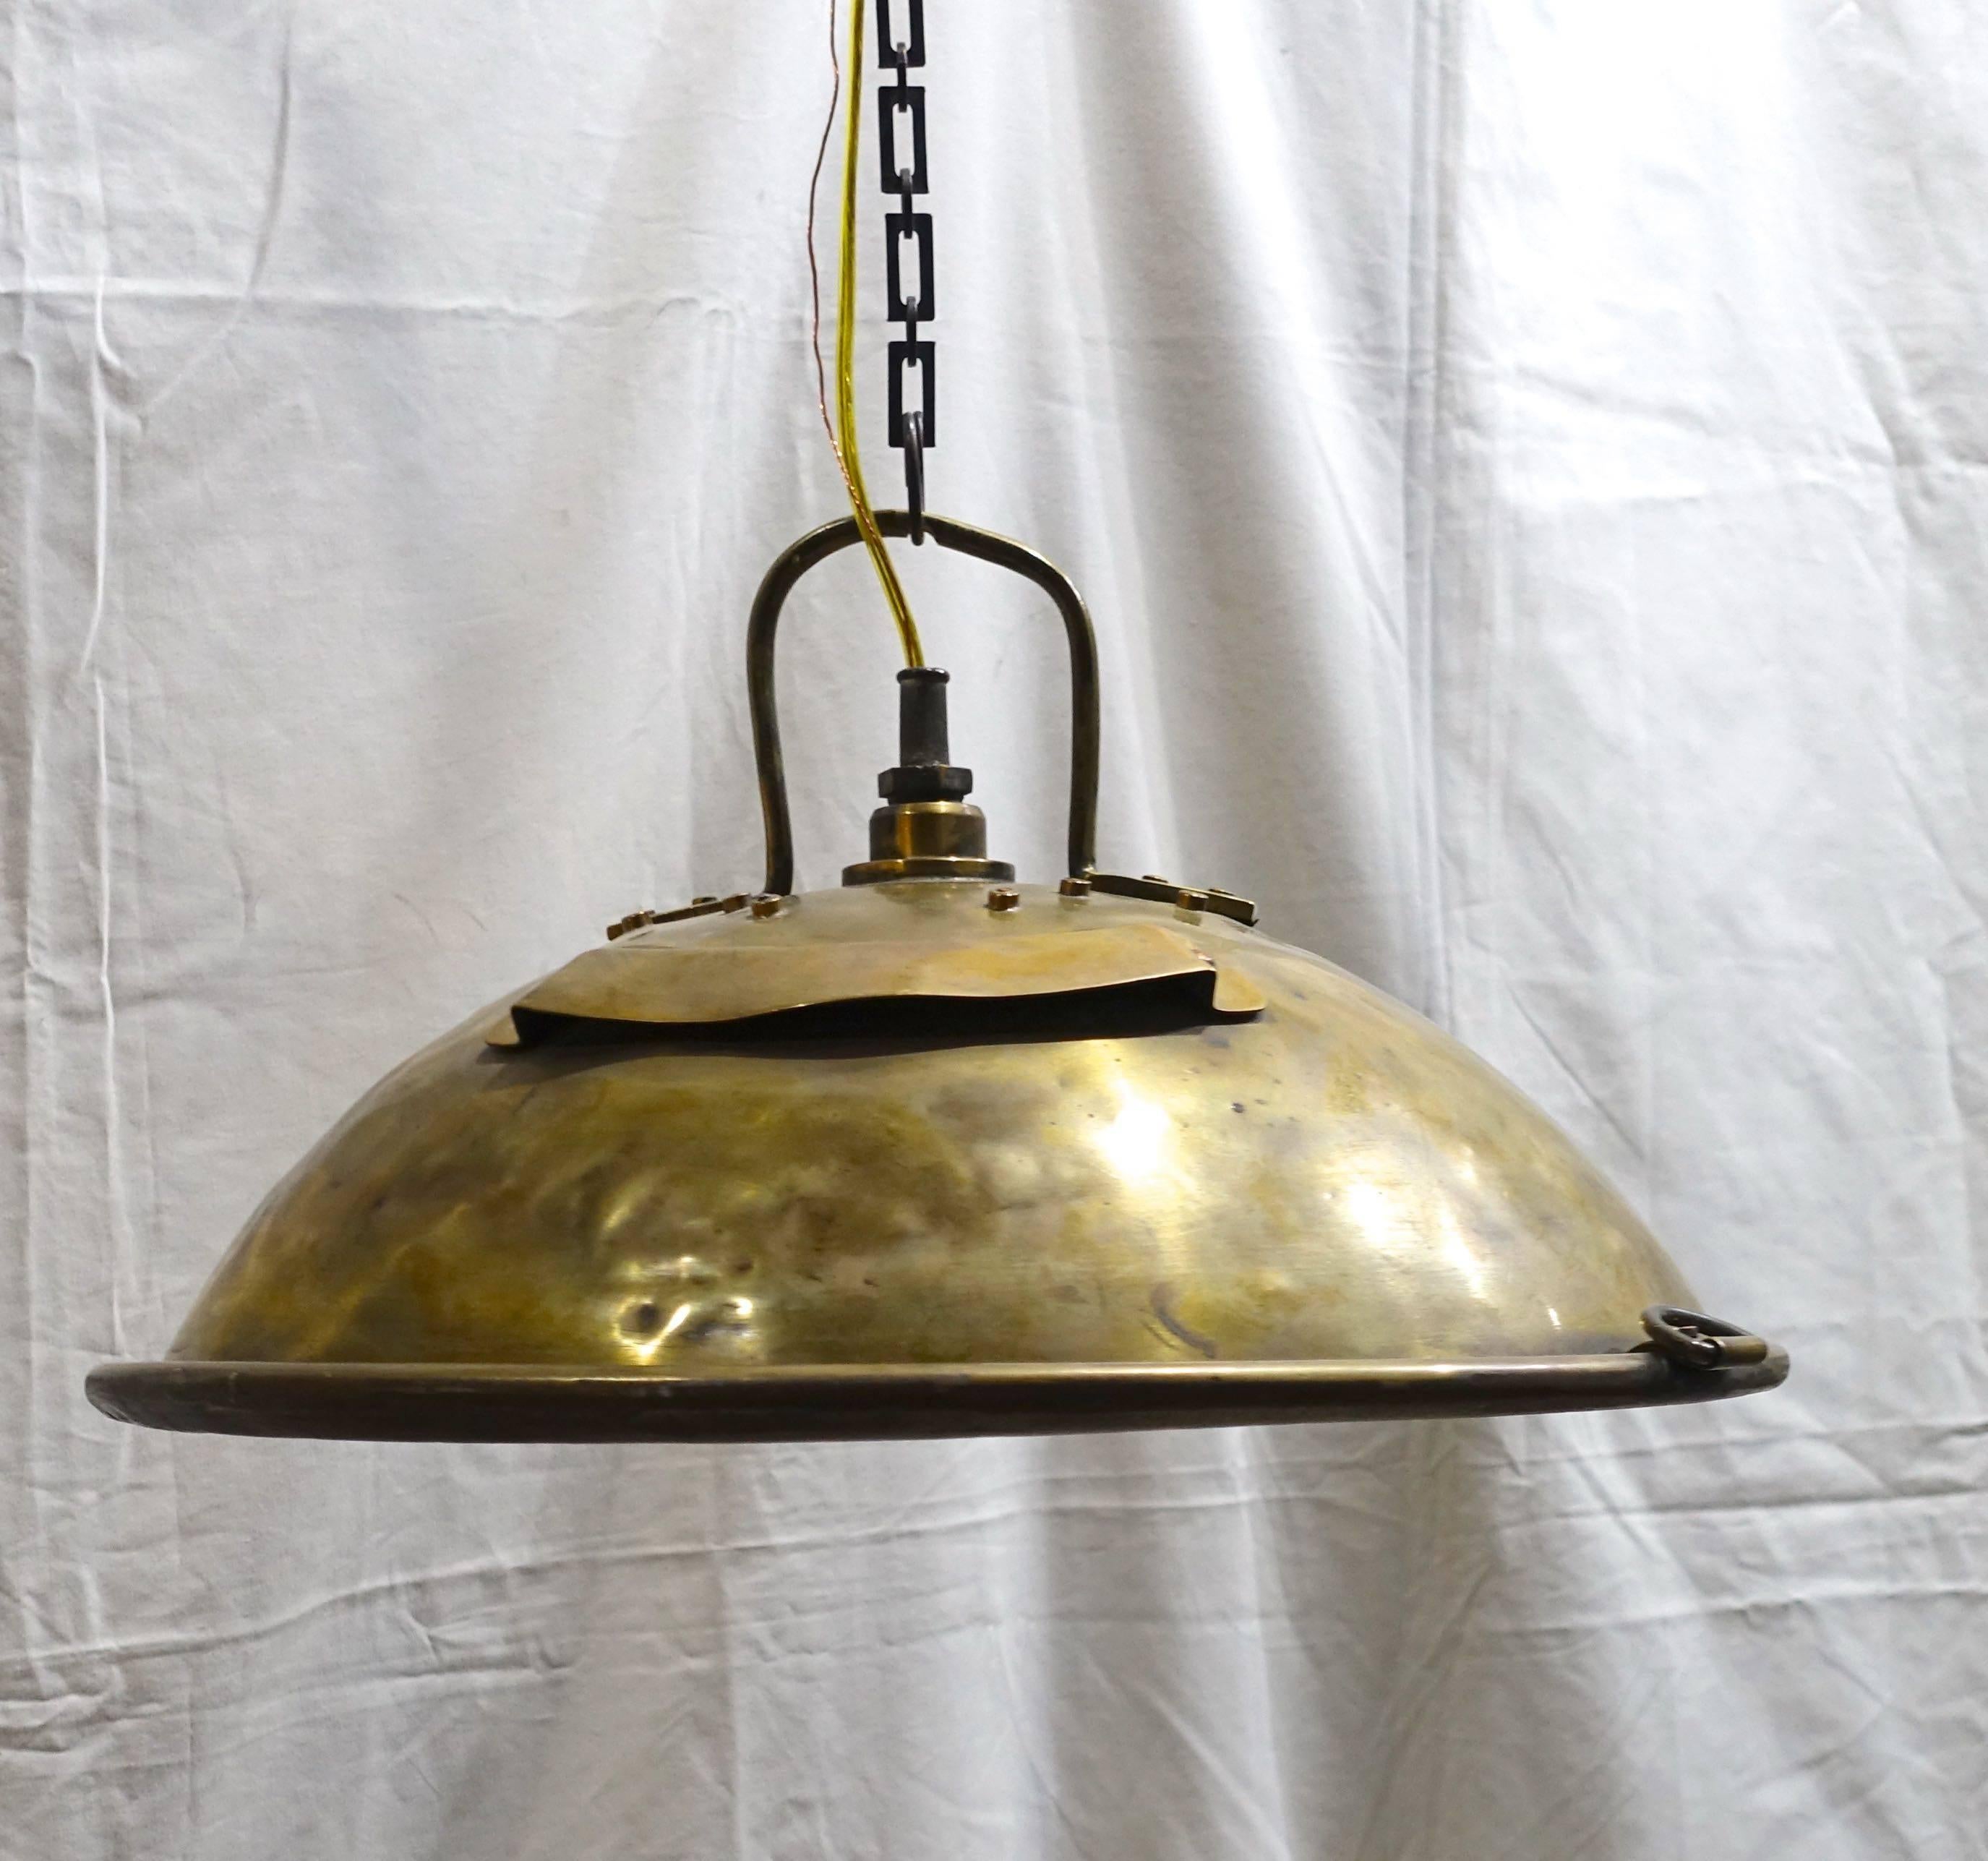 1920s English brass Industrial light fixture originally used as a ship light.
The fixture has a decorative original chain and holds four light bulbs.
Recently rewired, the ceiling cap is supplied with the fixture.